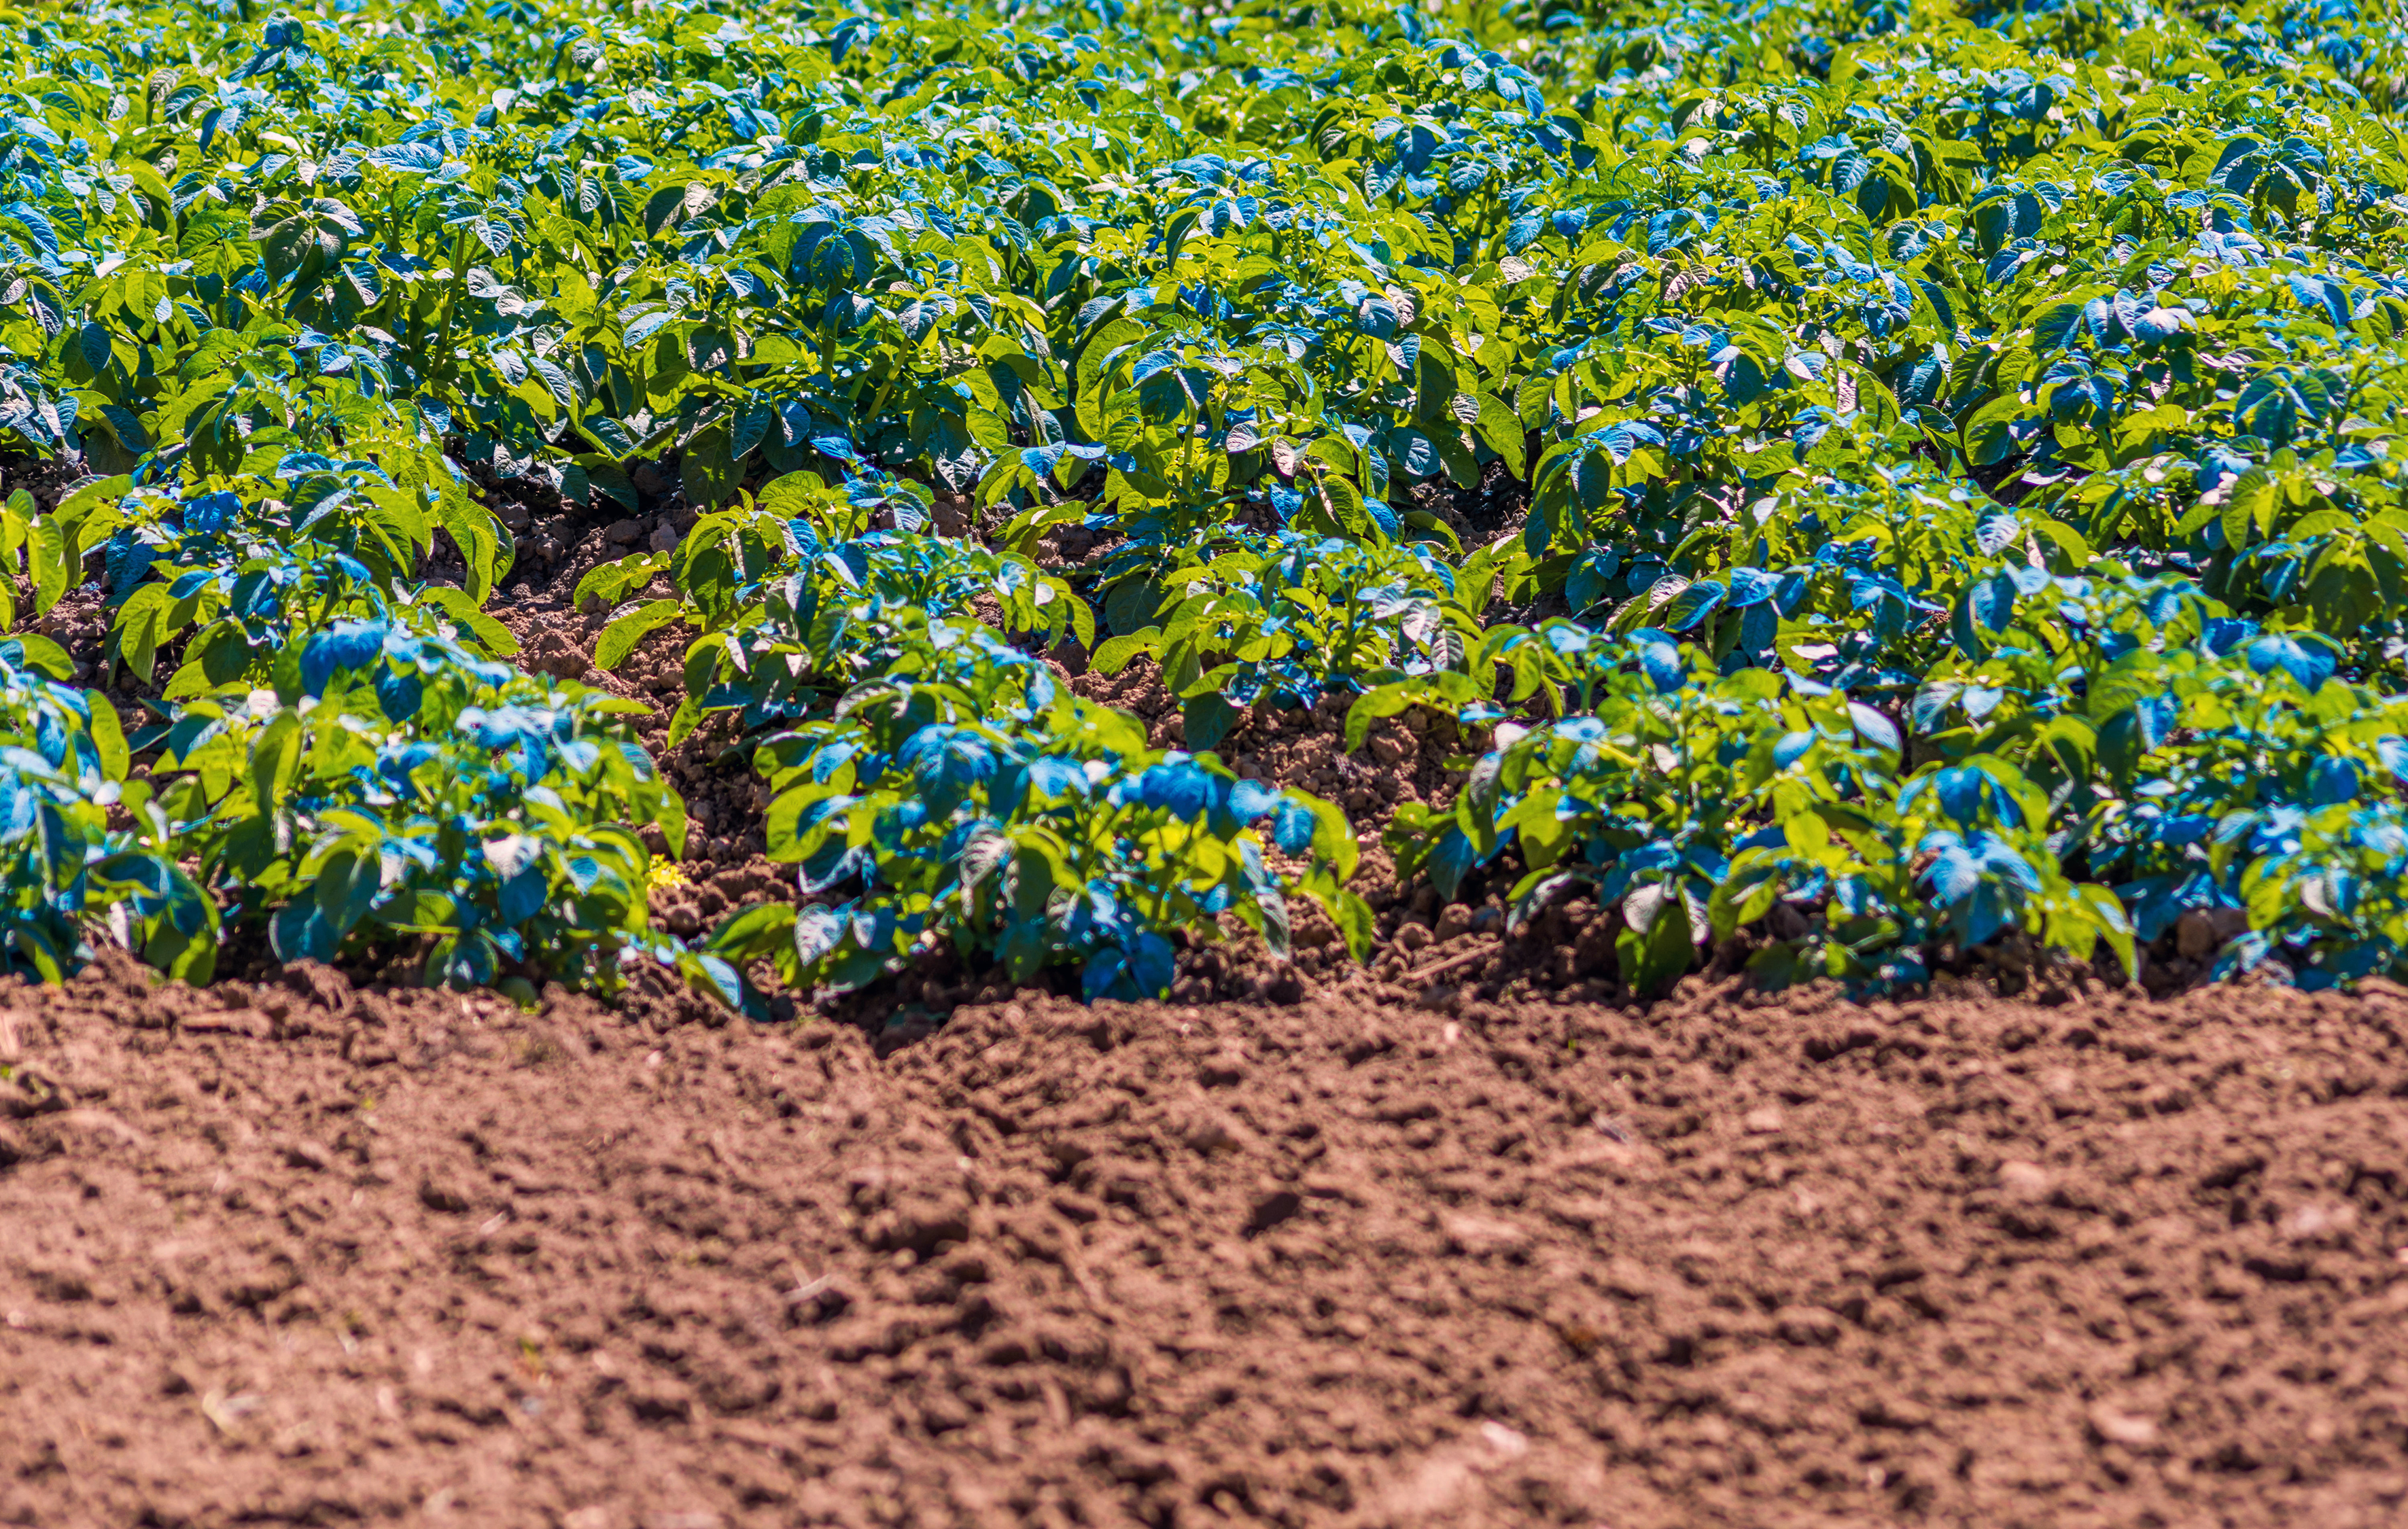 Potatoes sprayed with Copper Sulfate. Copper sulfate can be used as a fertilizer or fungicide. It is commonly used by gardeners and commercial farmers (Photo: Dimitris Vlassis / Alamy Stock Photo)